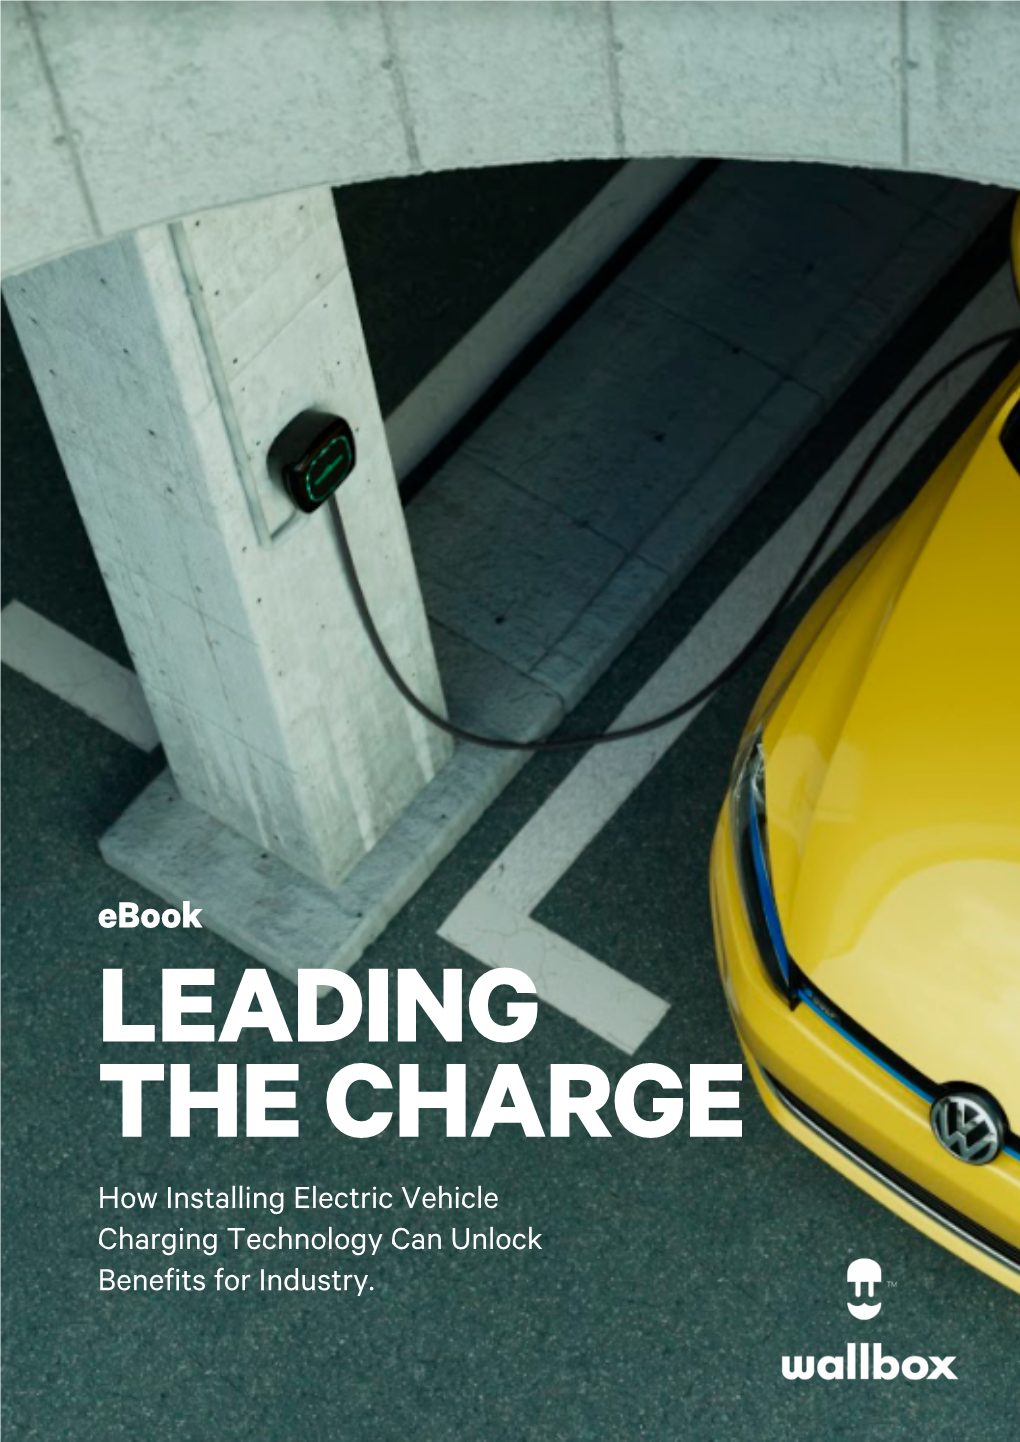 how-installing-electric-vehicle-charging-technology-can-unlock-benefits